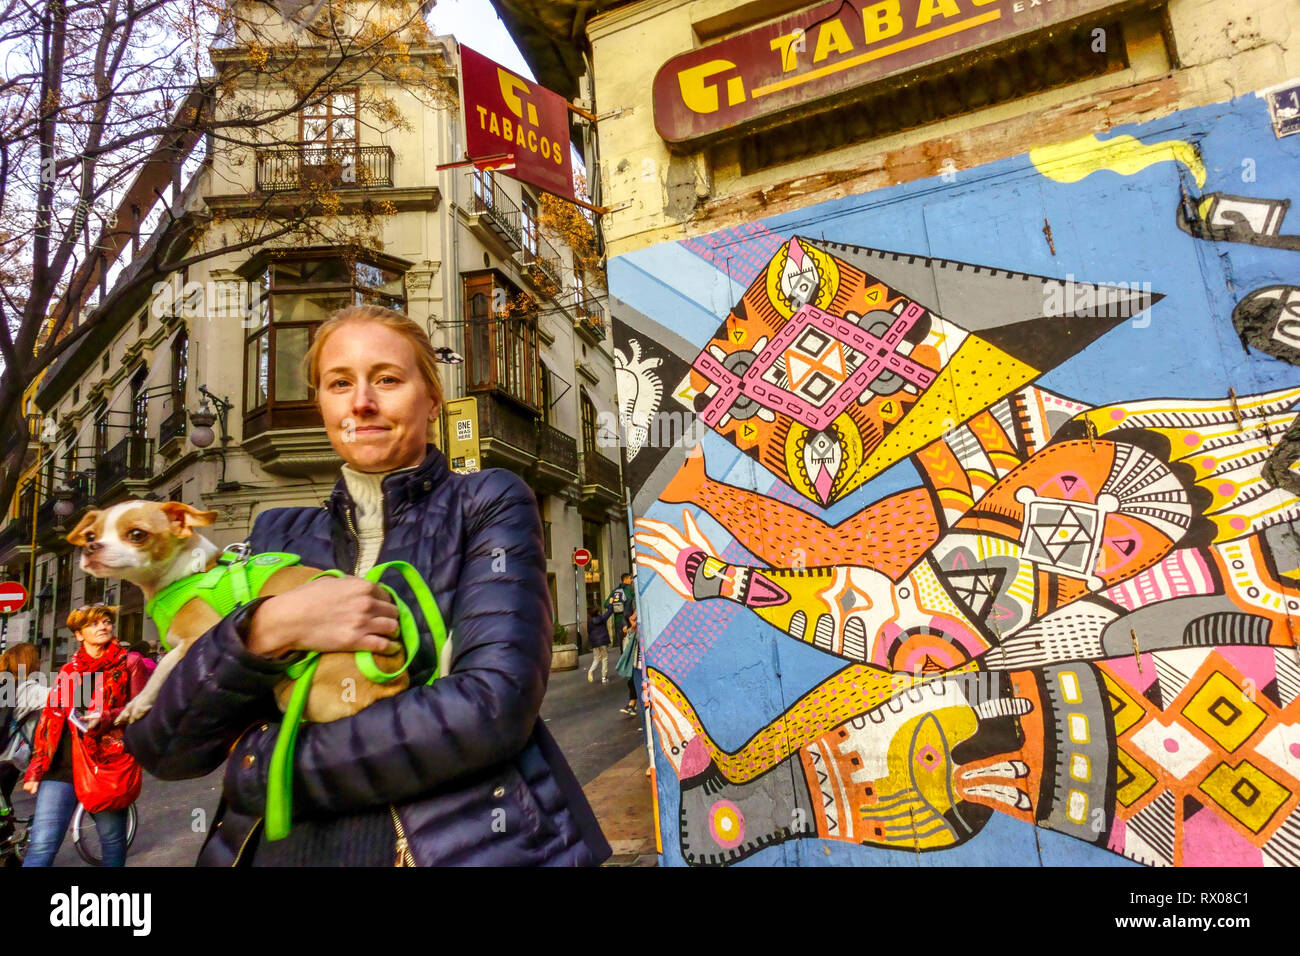 Valencia Street art view, a woman with a dog Spain Valencia Old Town, El Carmen Valencia street scene Stock Photo